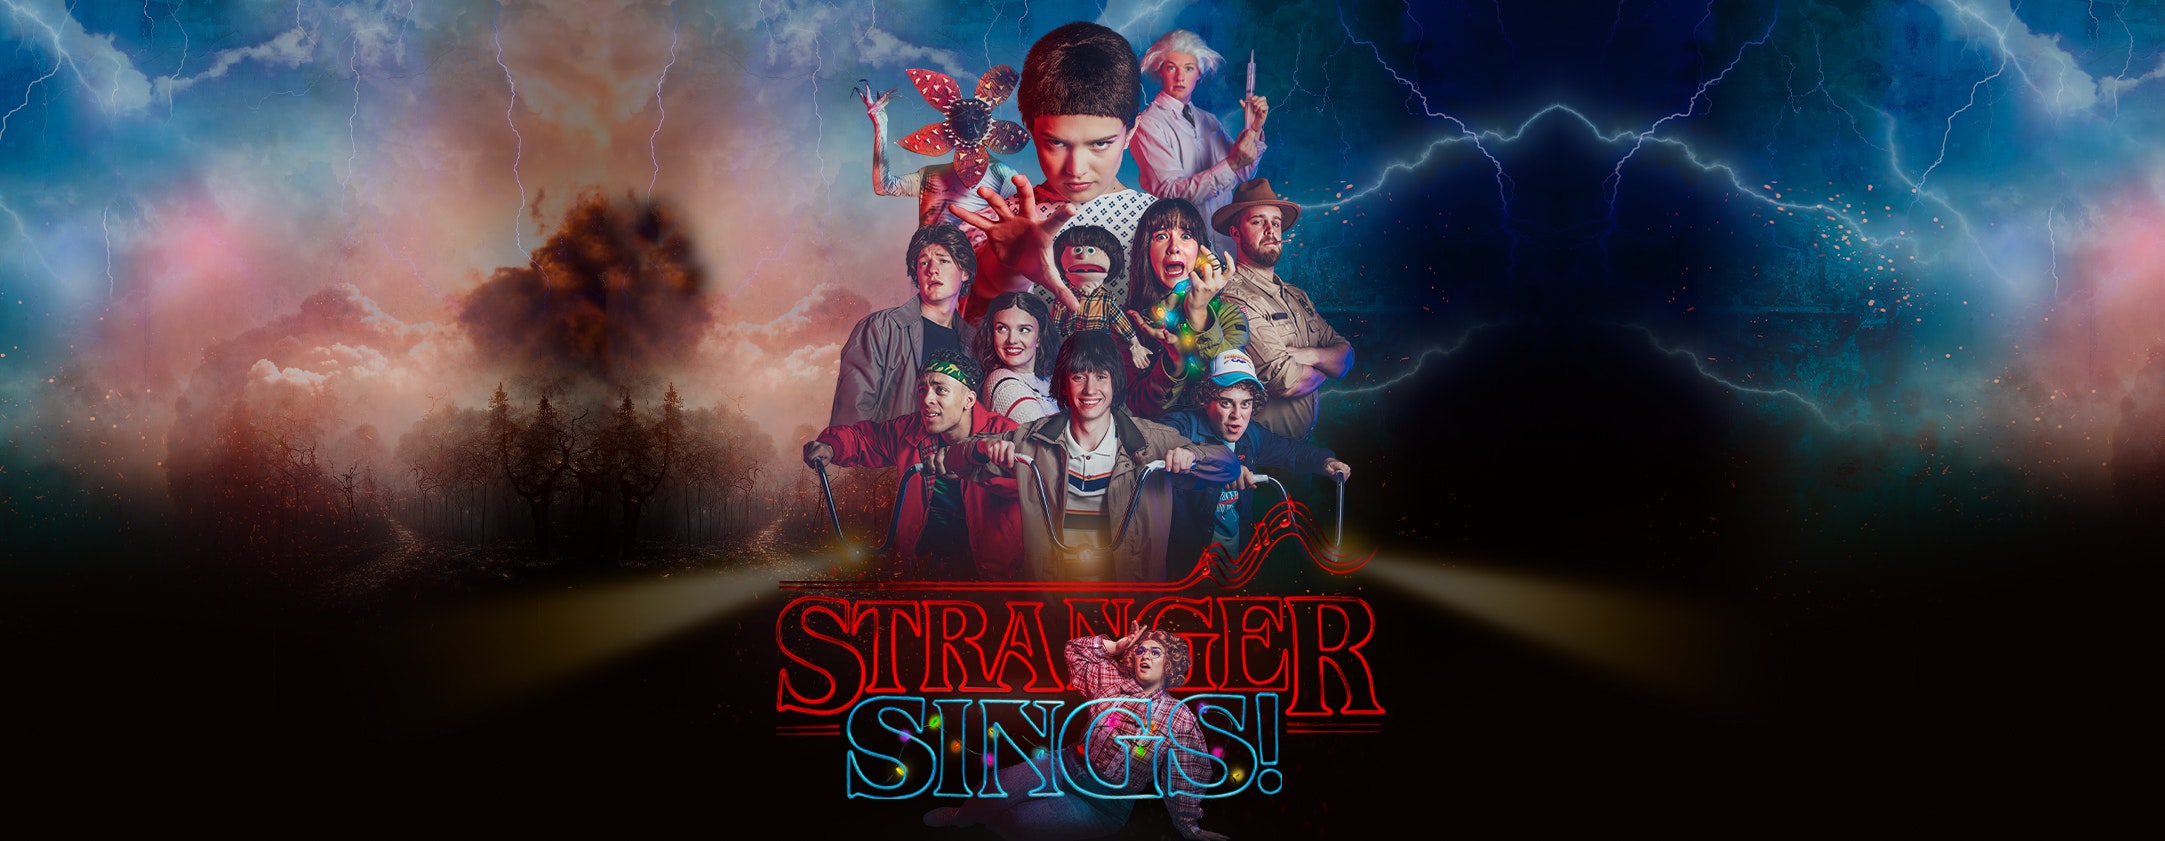 A banner image of Stranger Sings parody event. A group of characters of Stranger Things characters stand in a group, the backdrop shows lightening and dark clouds.